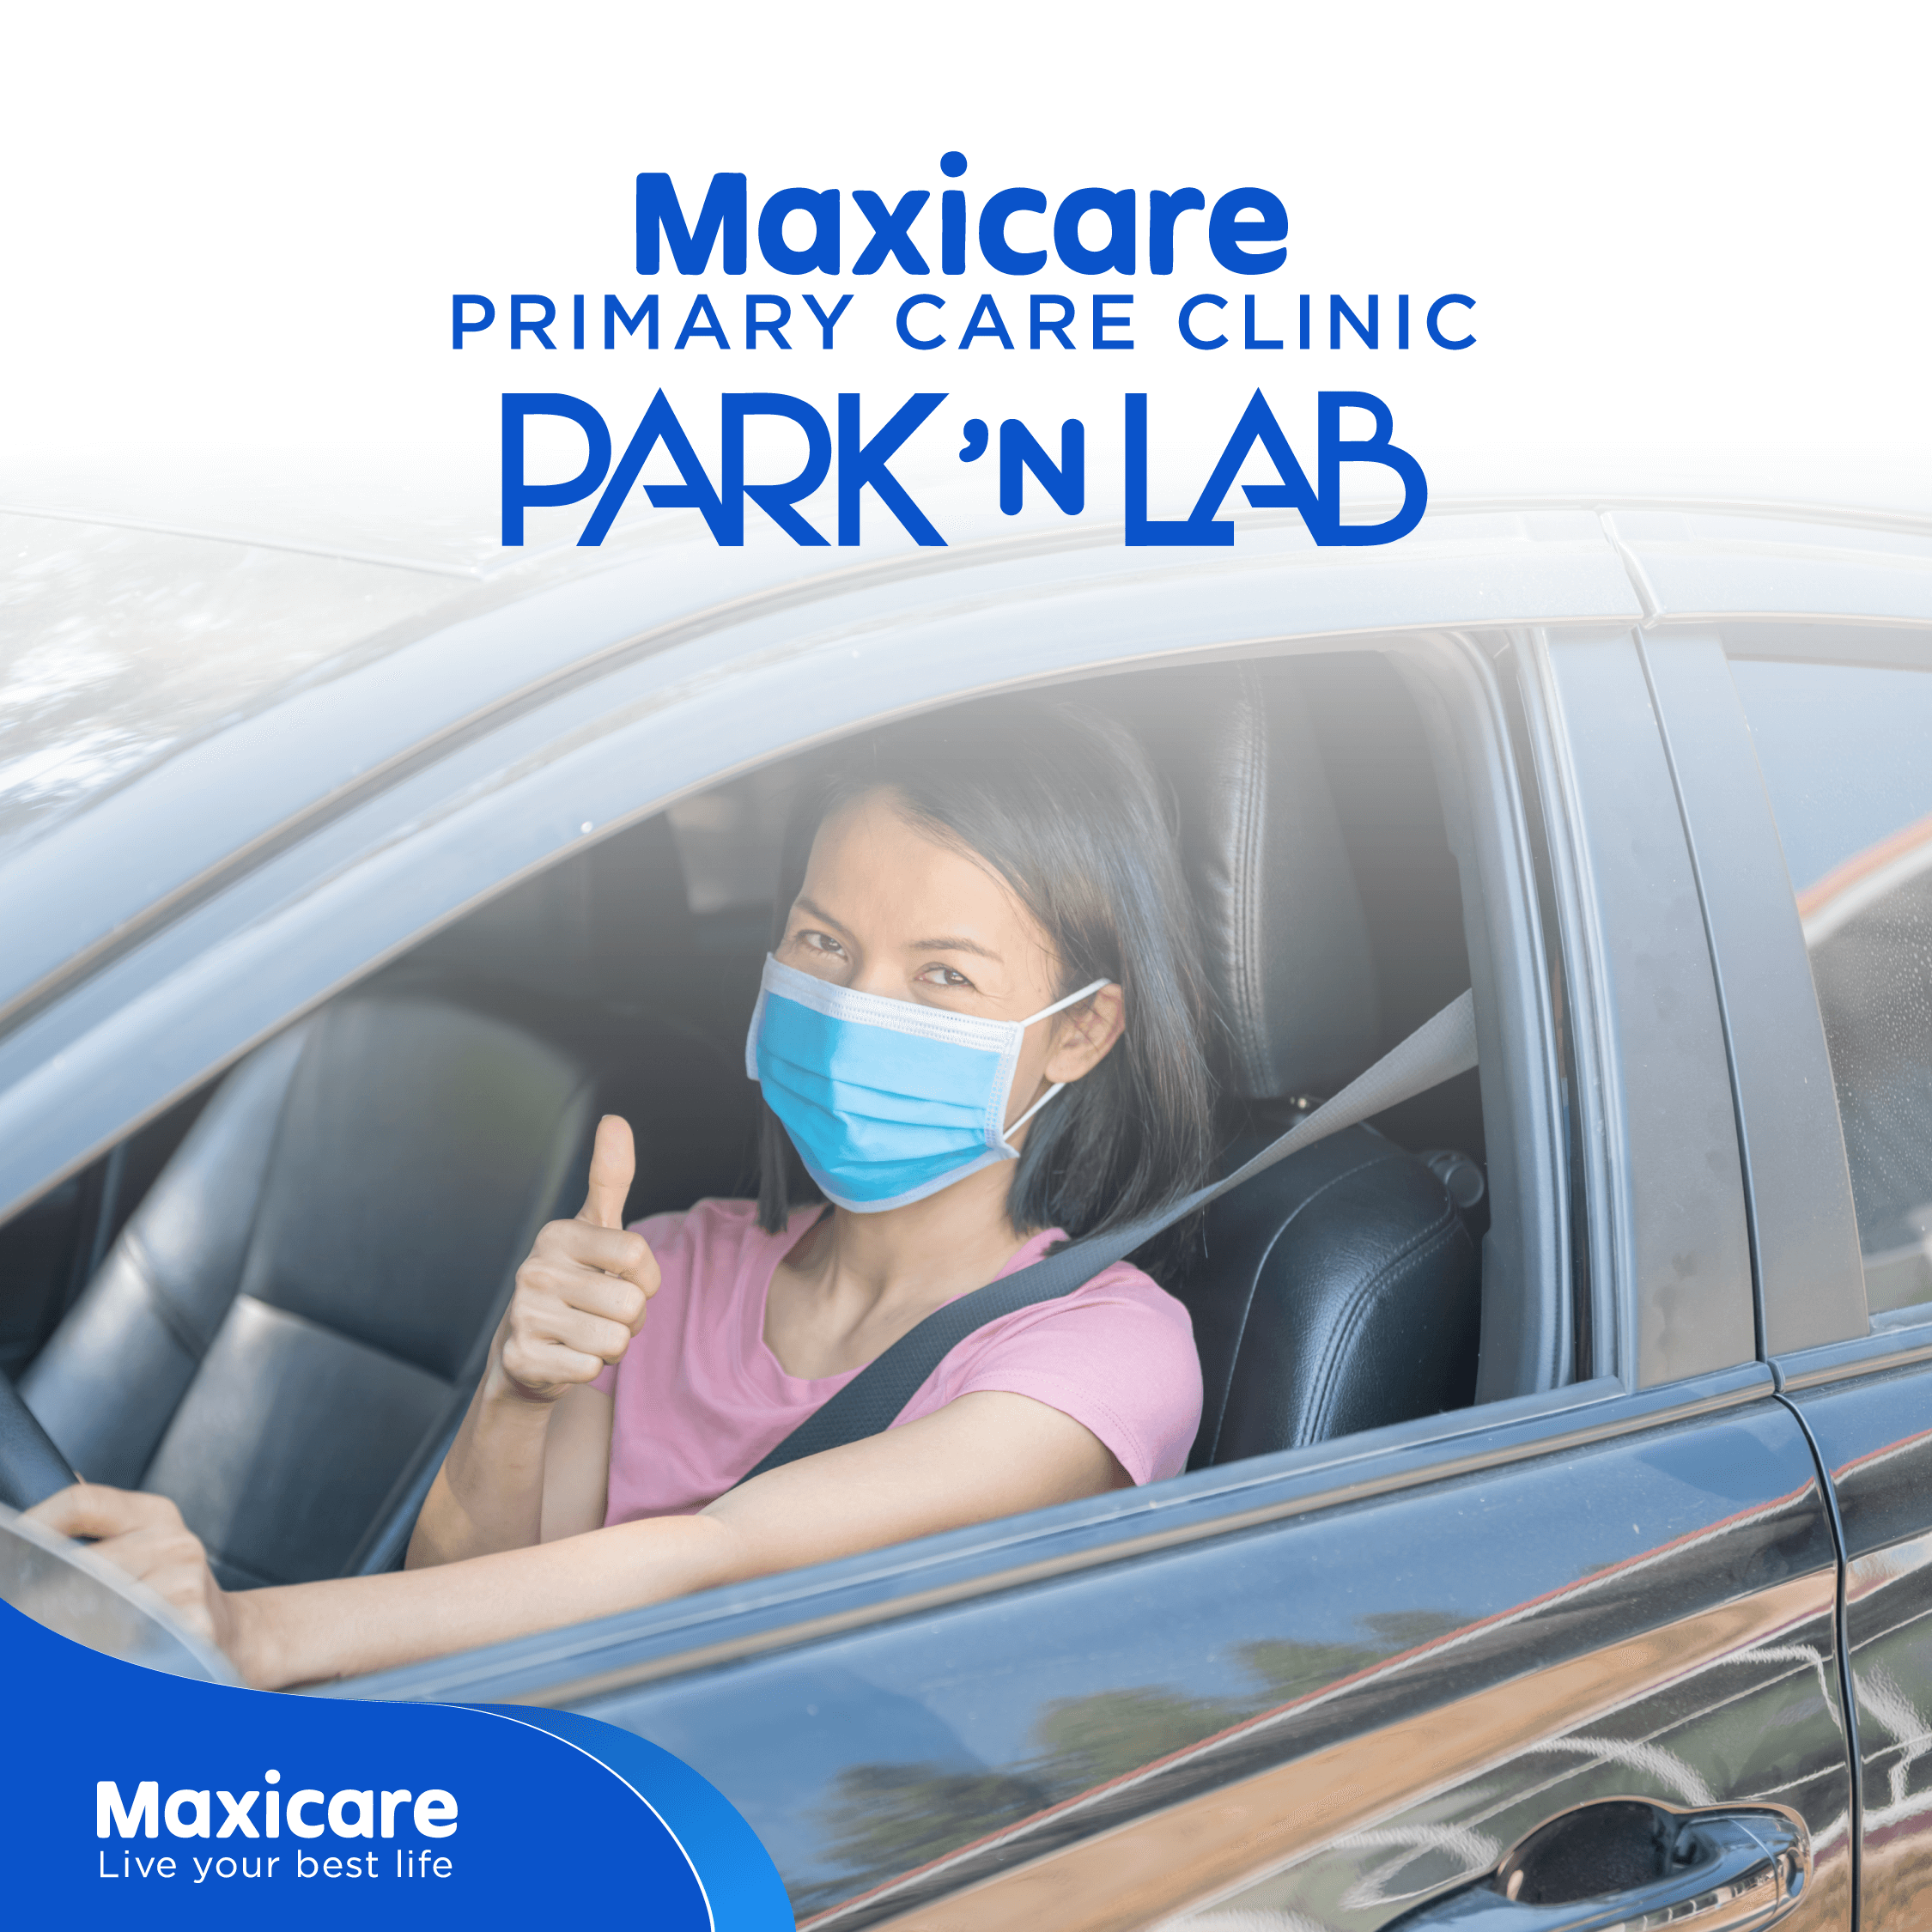 Complete  your lab tests right inside your car with Maxicare Park N Lab!